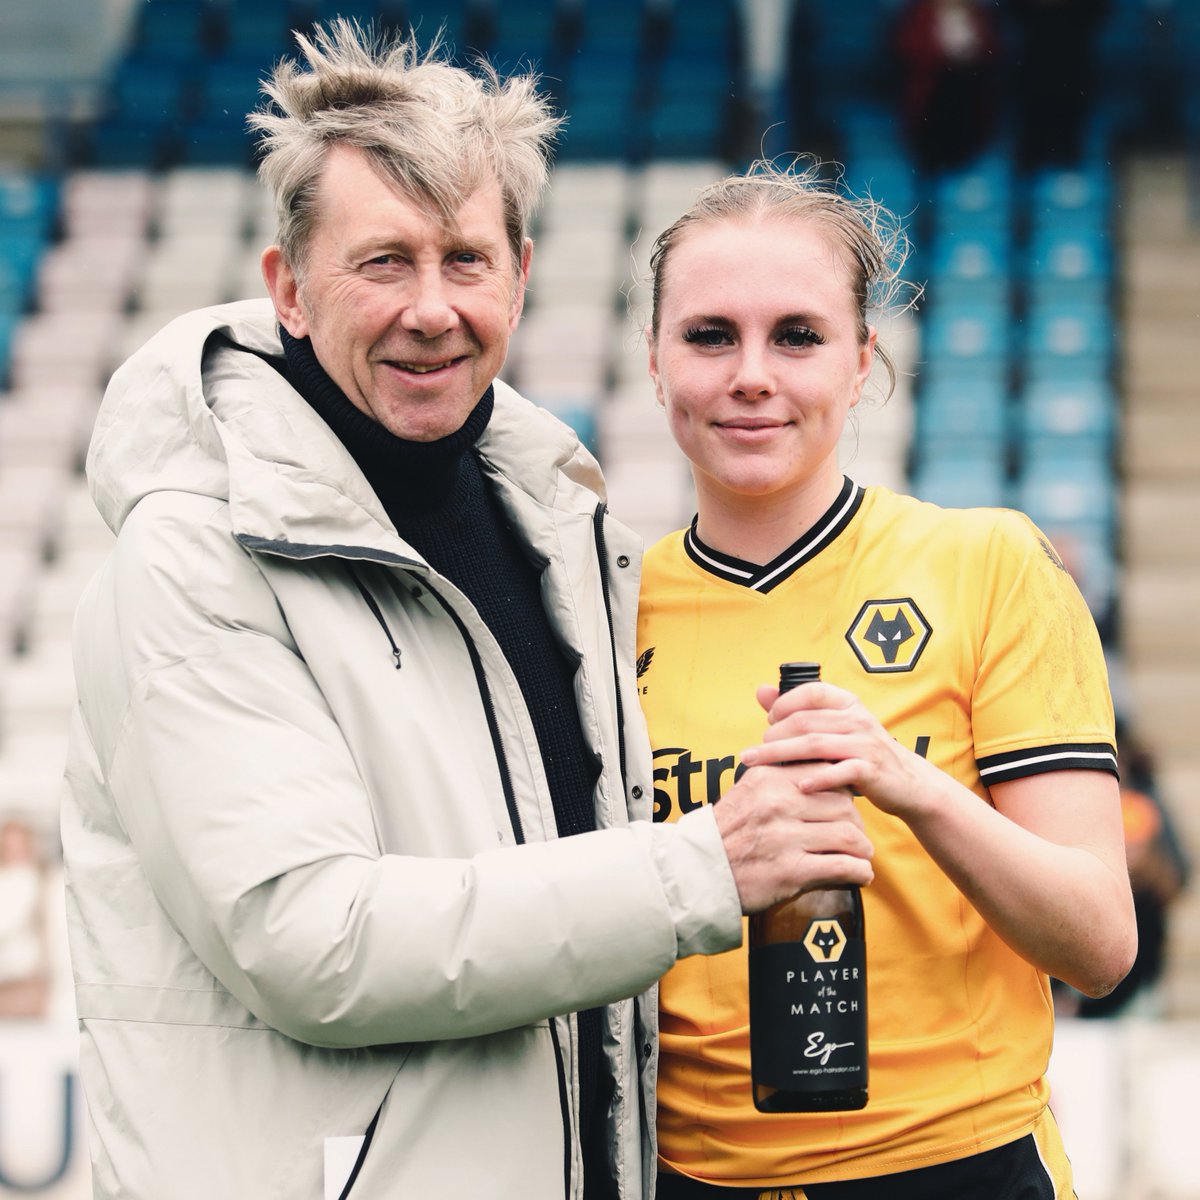 Two goals off the bench 👏 Sophie Bramford was yesterday's Player of the Match 🍾